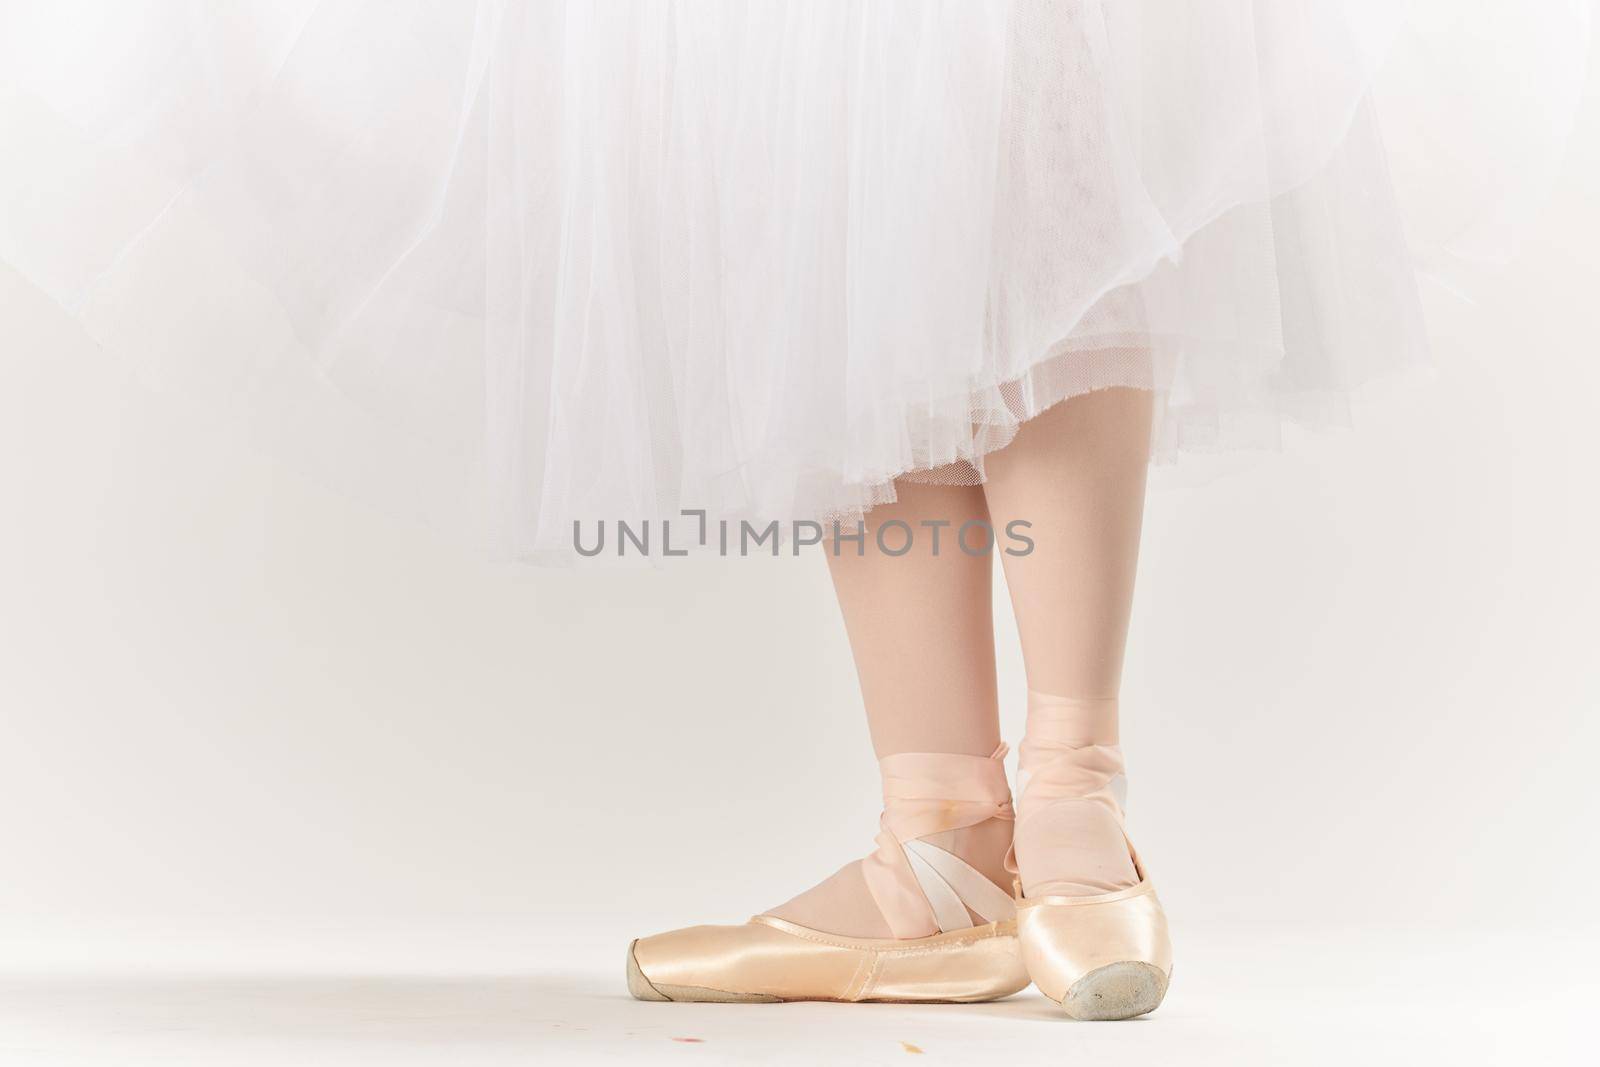 ballet shoes posing fashion exercise dance isolated background. High quality photo